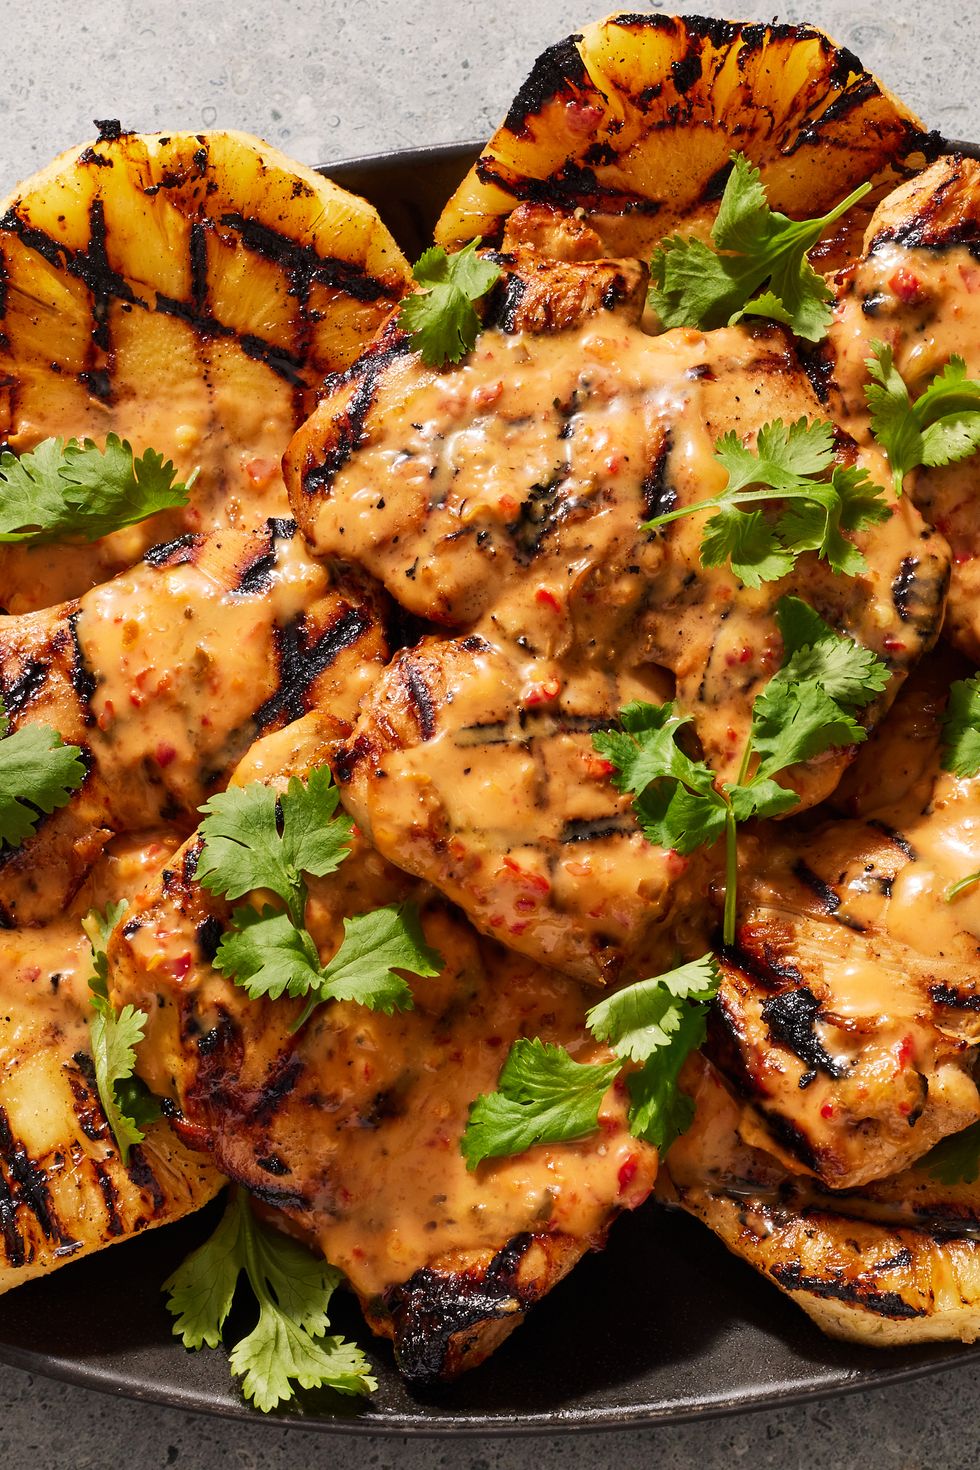 https://hips.hearstapps.com/hmg-prod/images/spicy-coconut-grilled-chicken-2-1672870819.jpg?crop=0.9059089973234508xw:1xh;center,top&resize=980:*